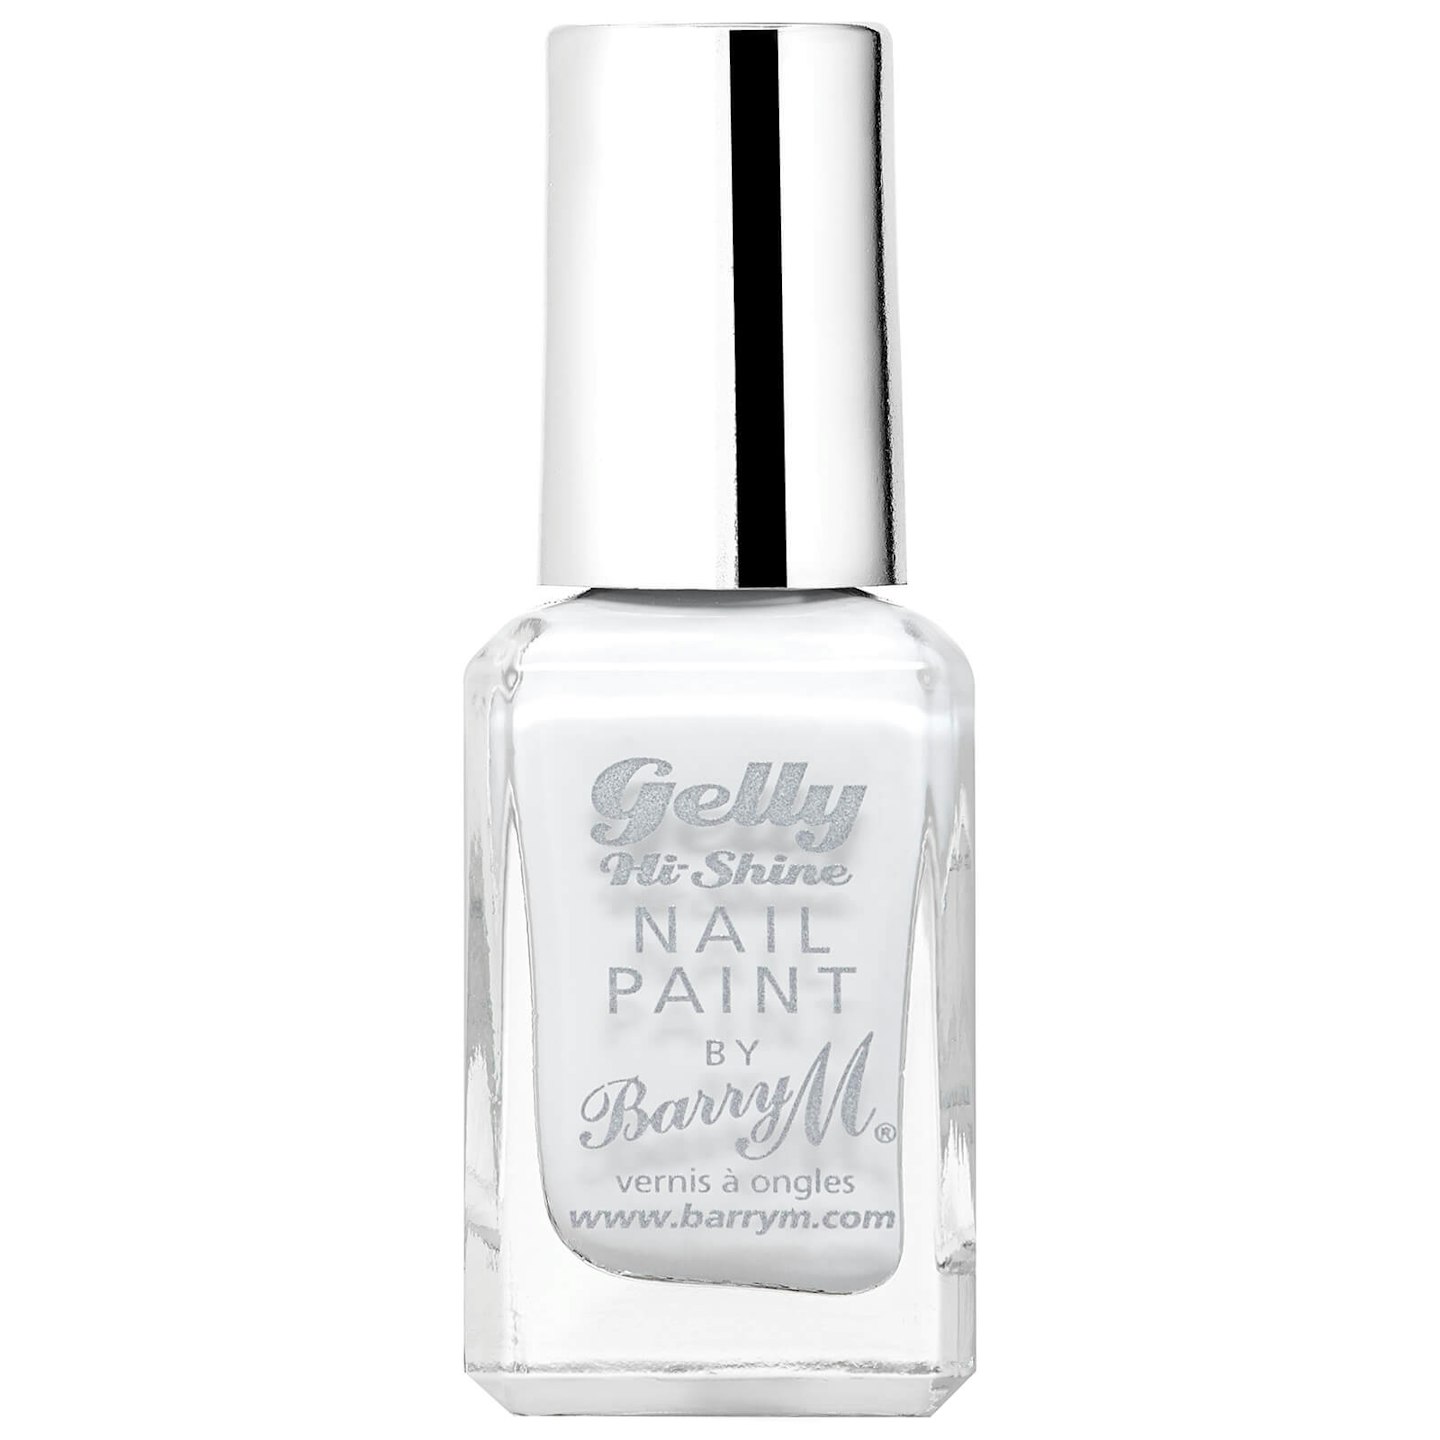 Barry M Cosmetics Gelly Hi Shine Nail Paint in Cotton, £3.99